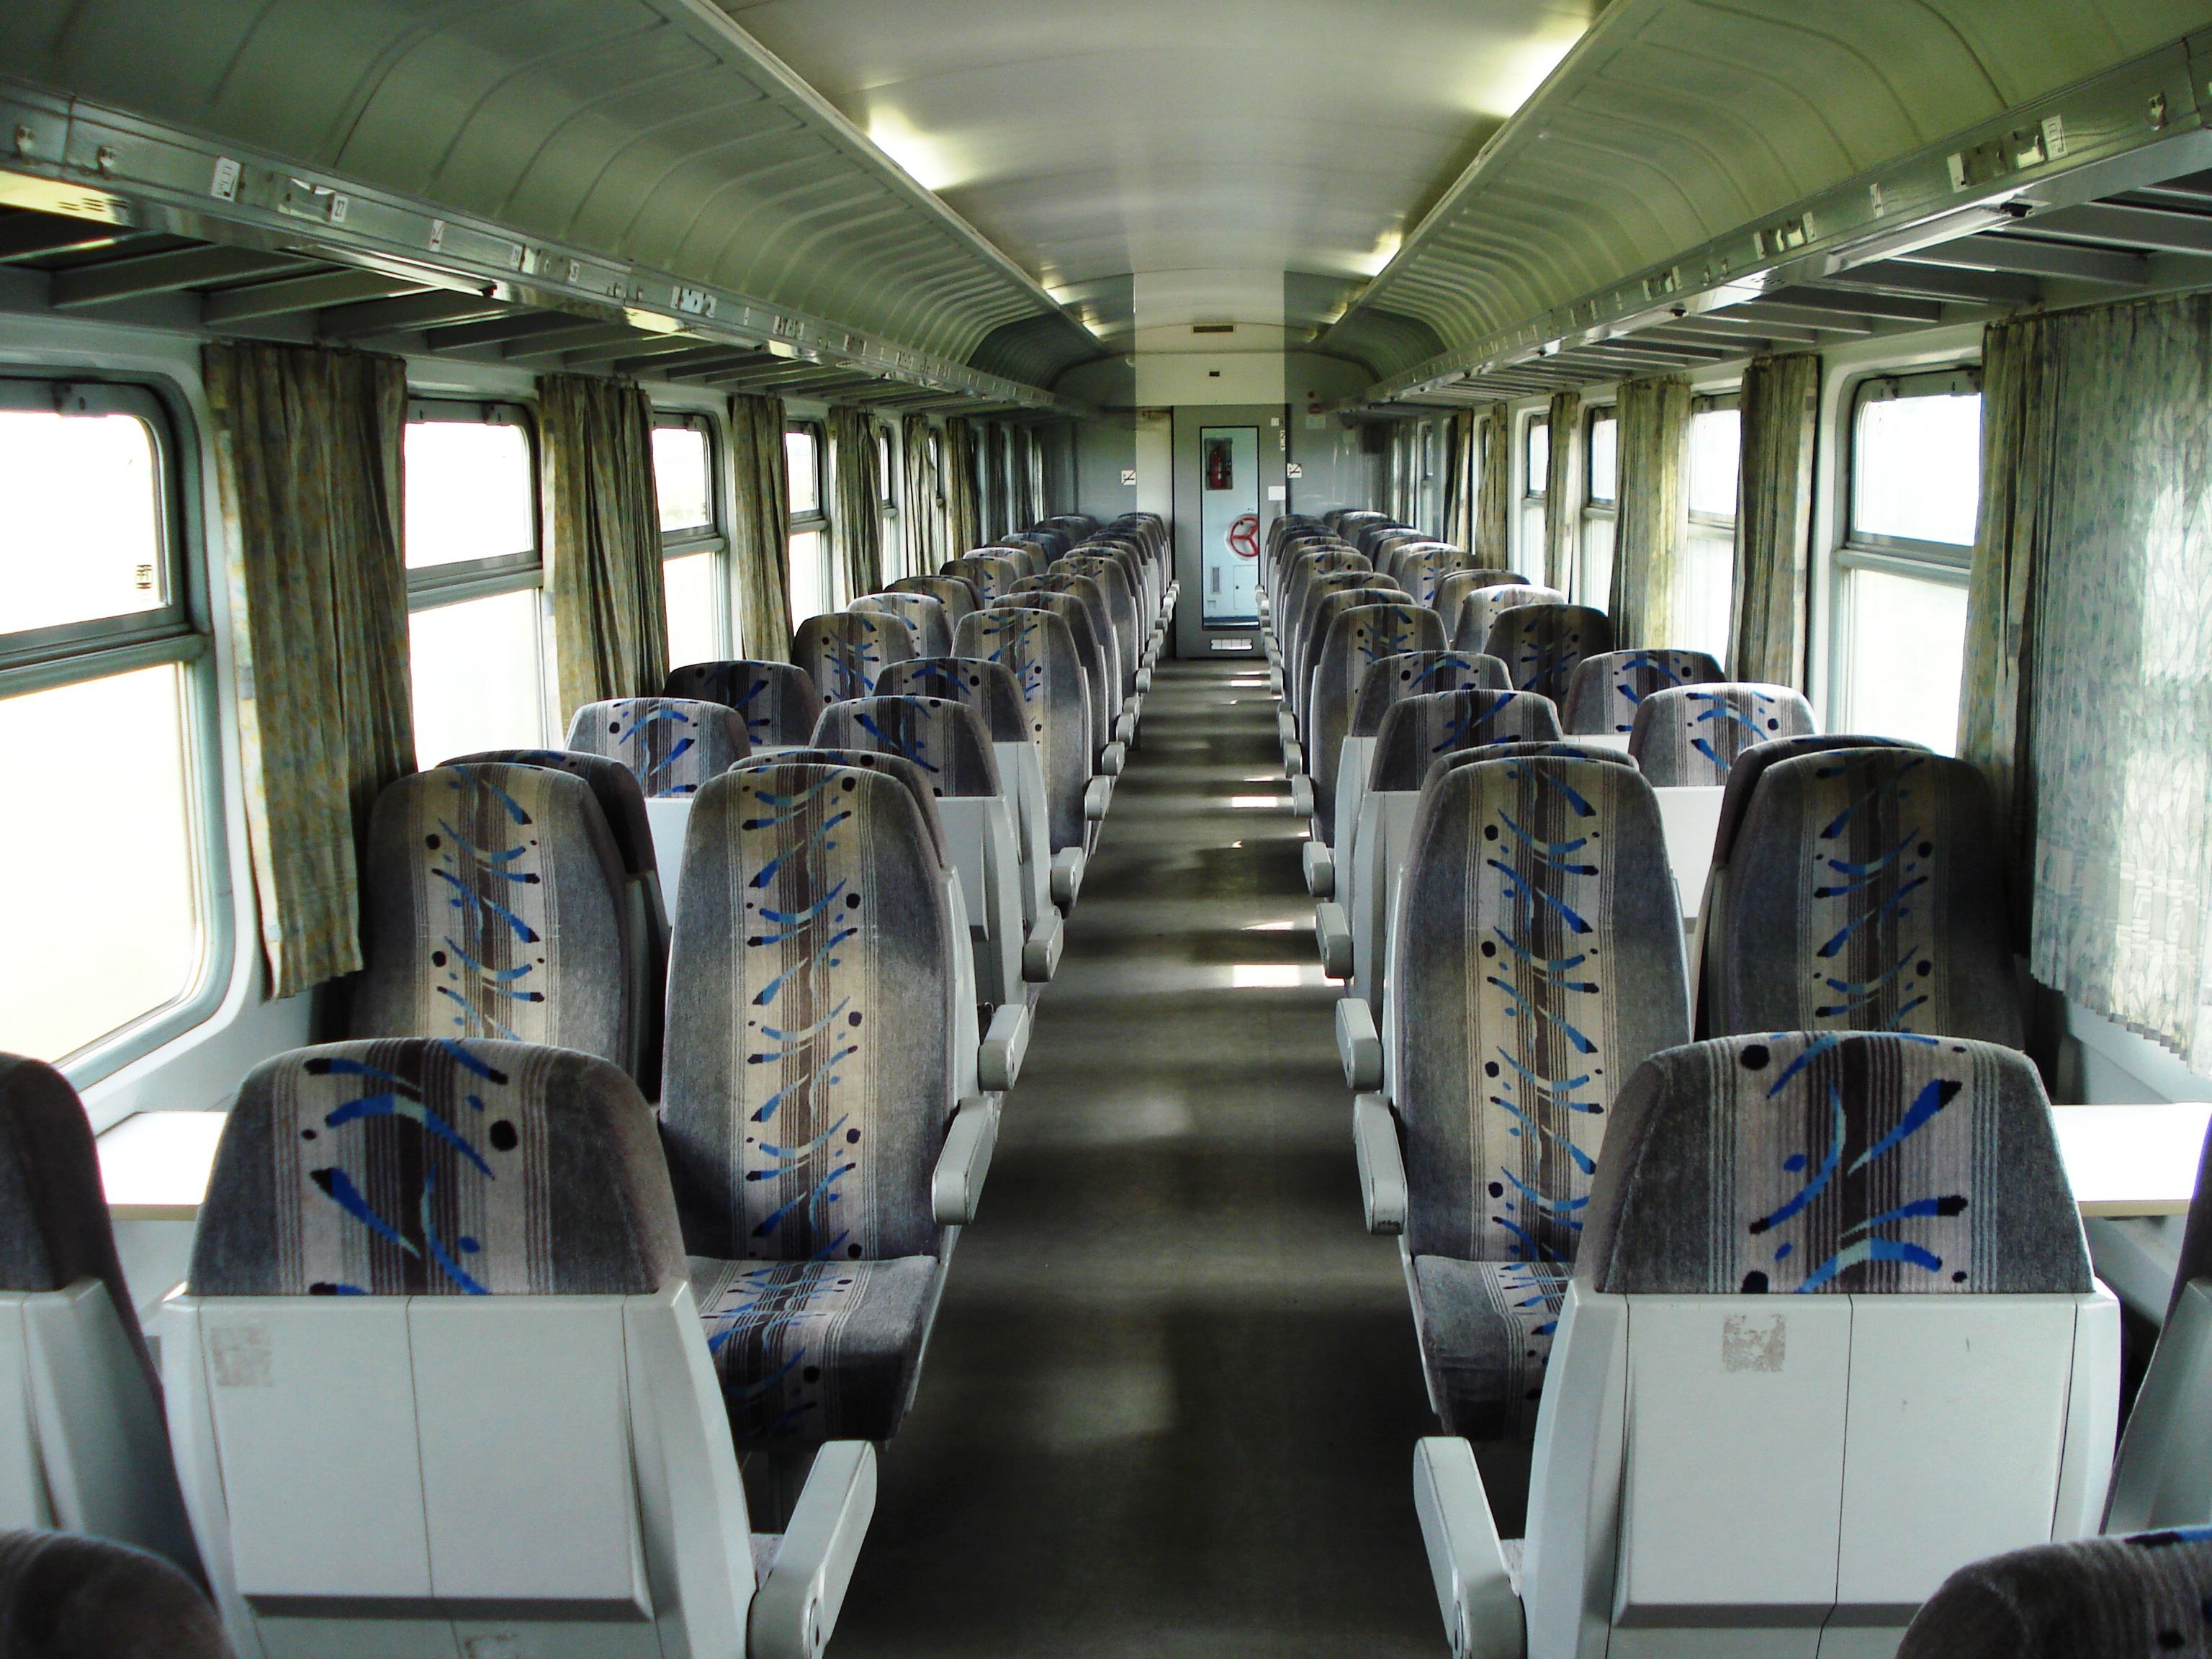 In central and eastern Europe, there is very little difference between First Class and Second Class on domestic trains